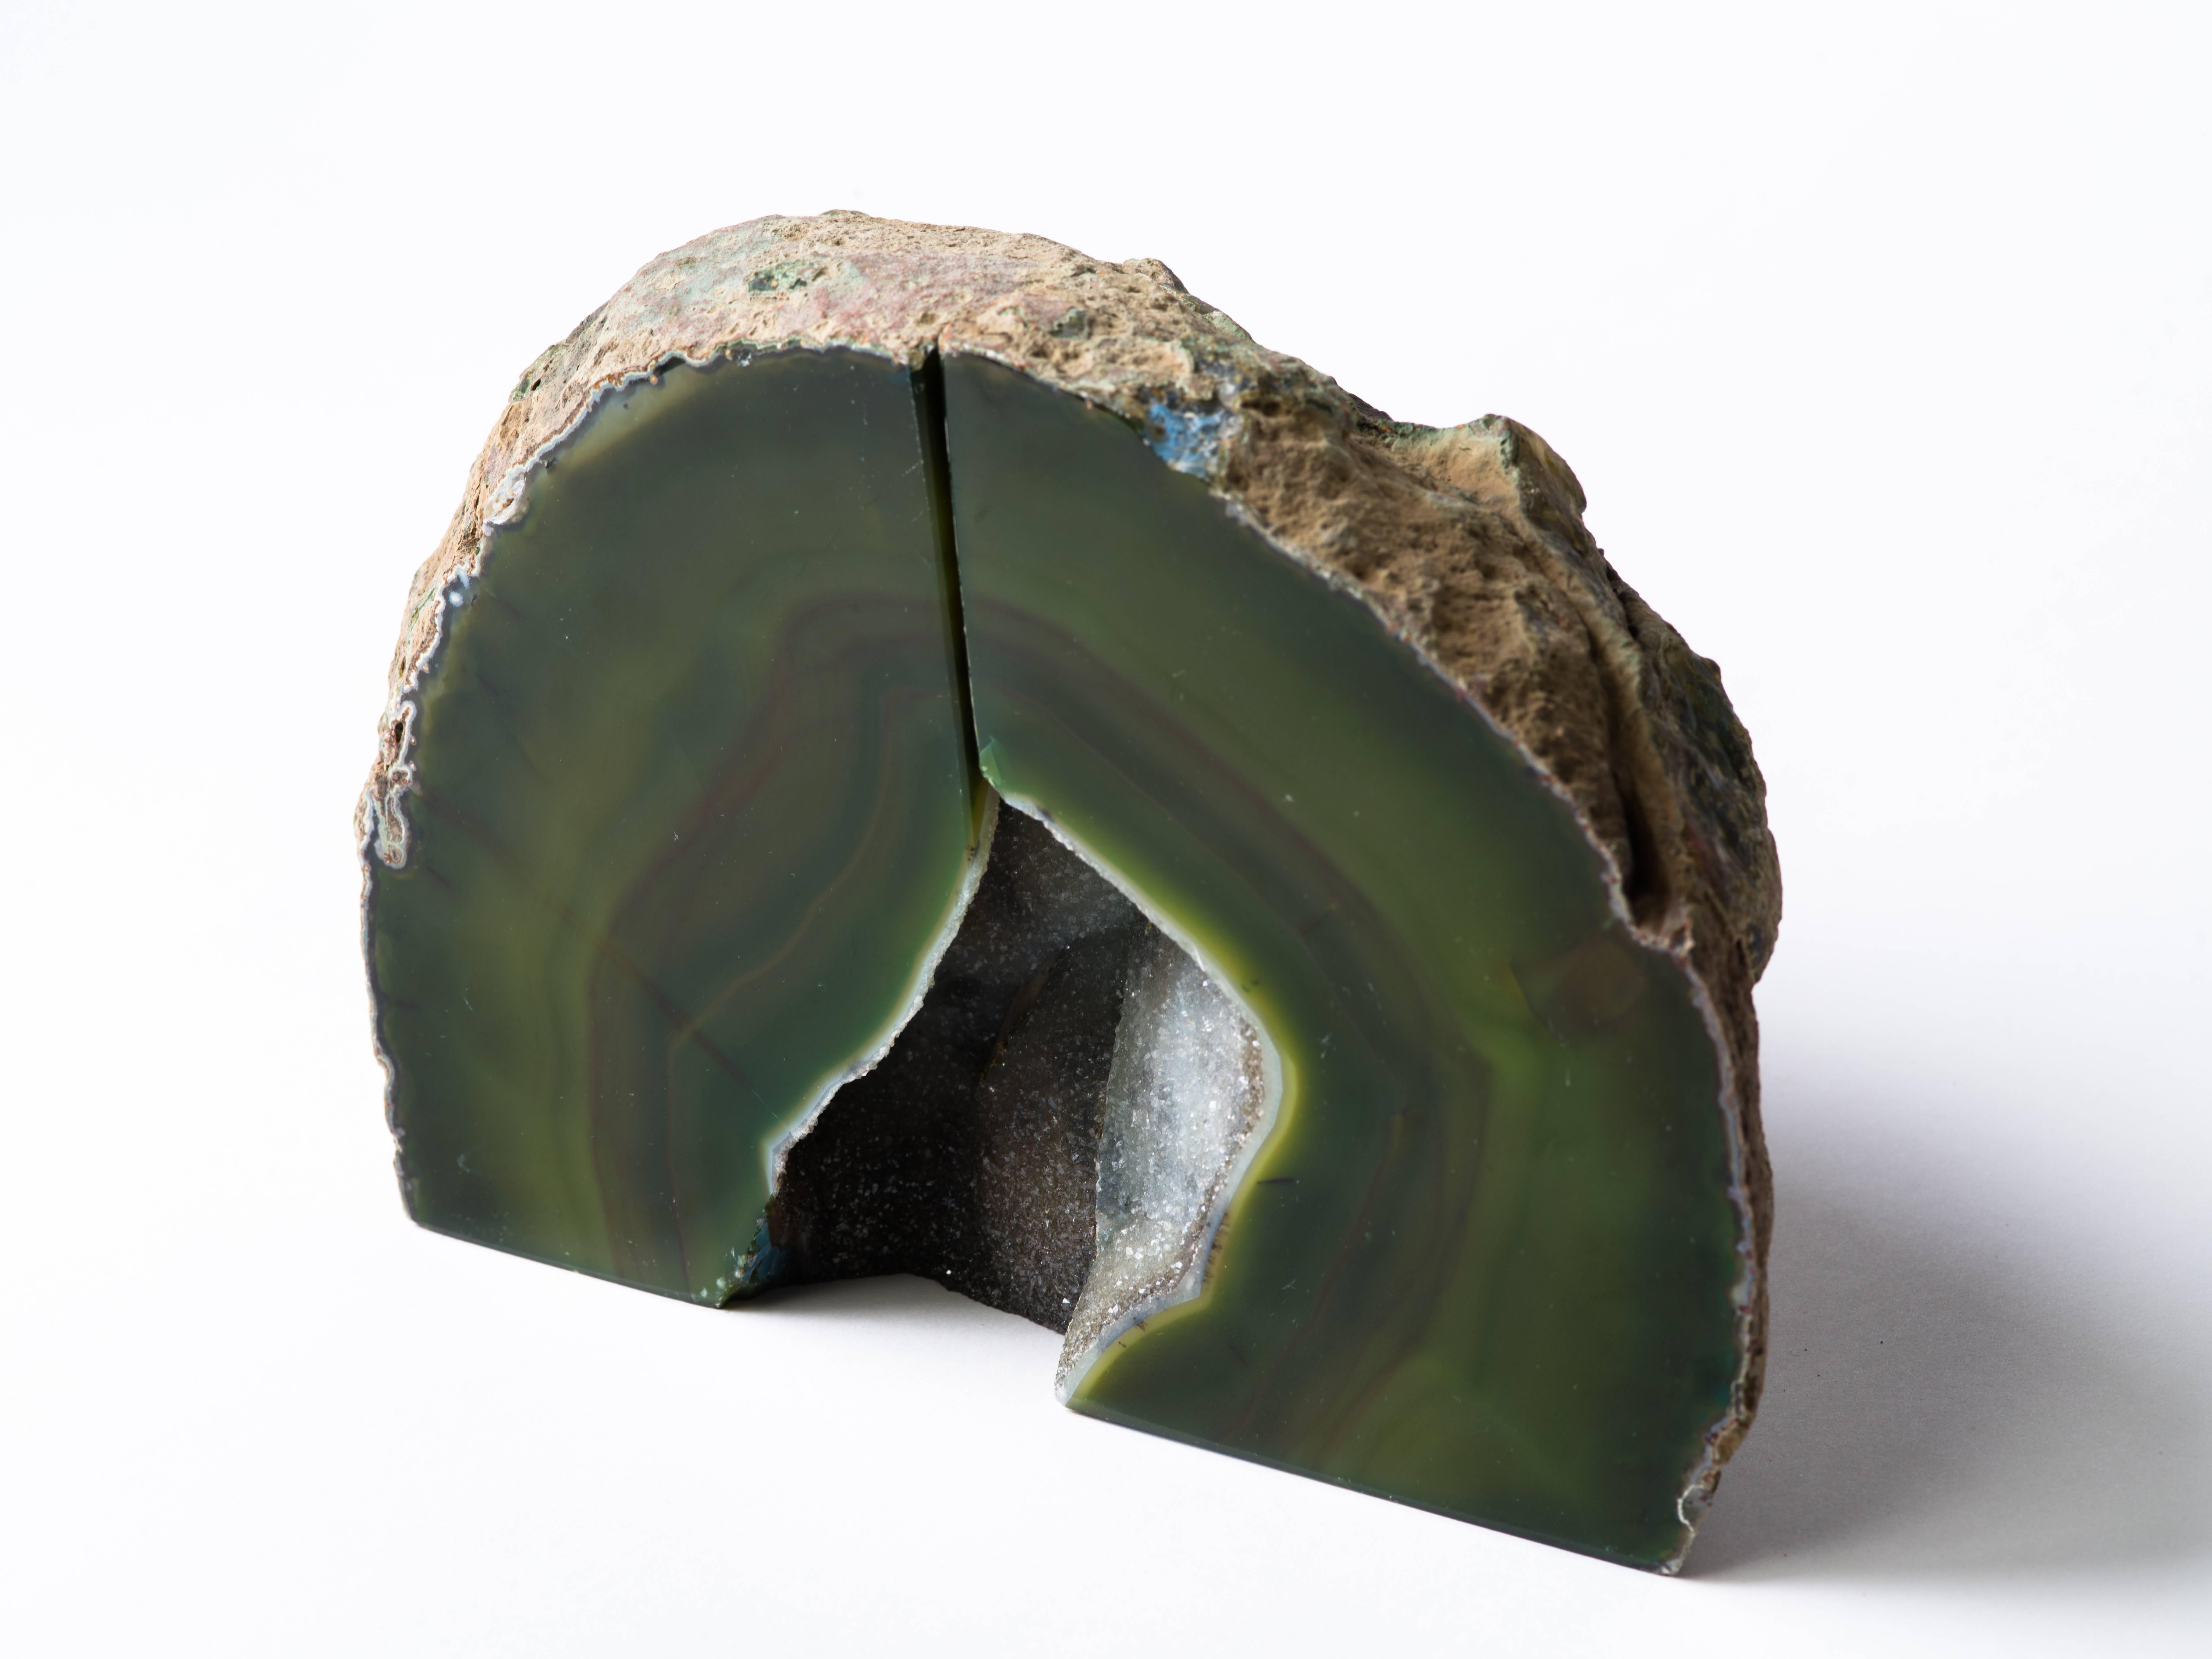 Pair of Organic Modern Agate Stone and Crystal Bookends in Moss Green (Organische Moderne)